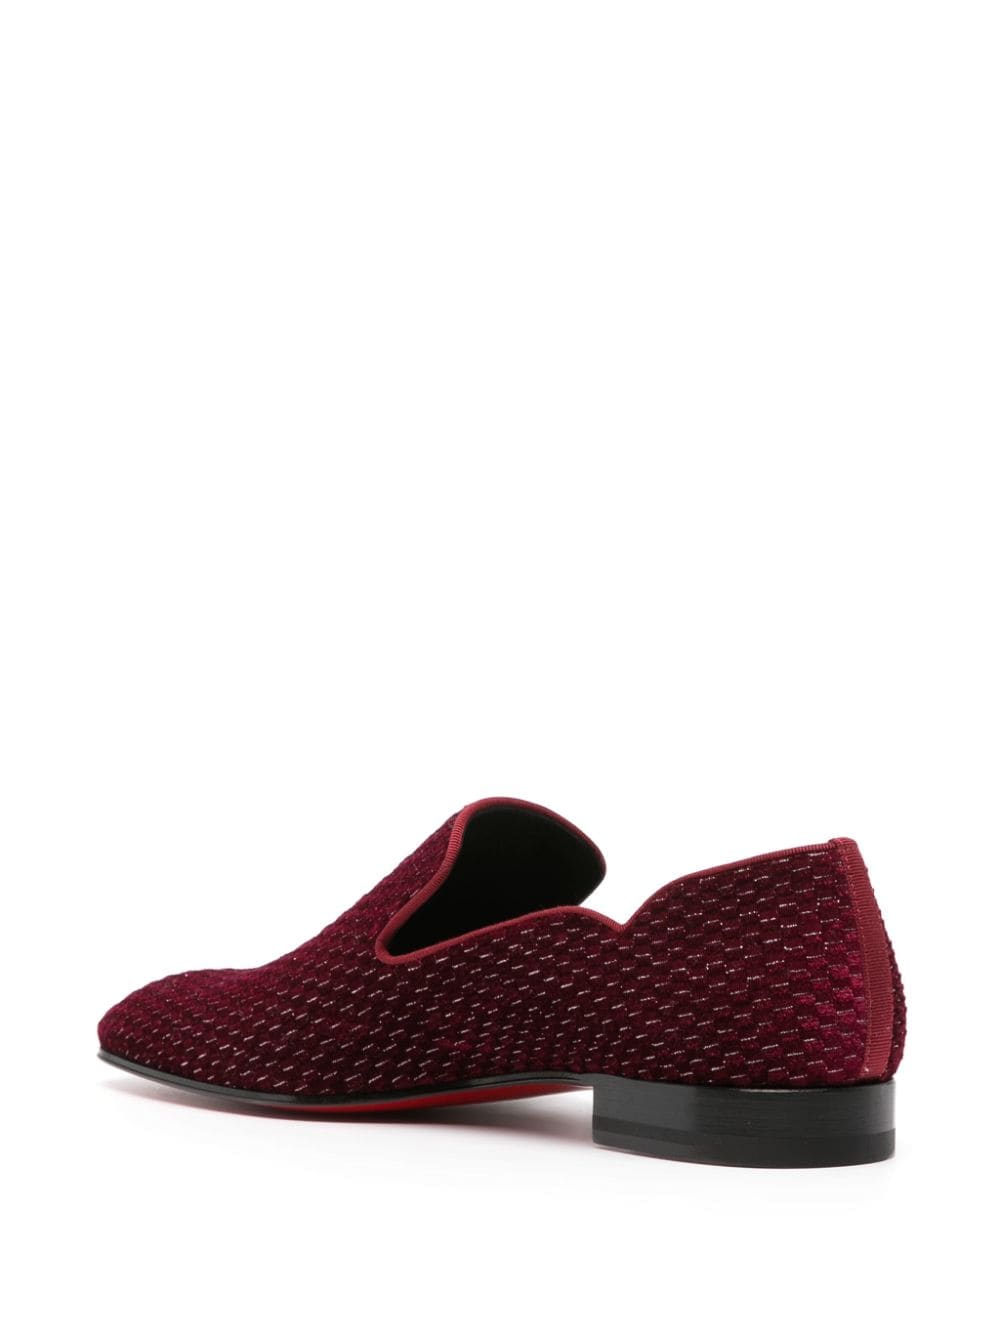 CHRISTIAN LOUBOUTIN Dark Red Velvet Loafers with Signature Red Sole for Men